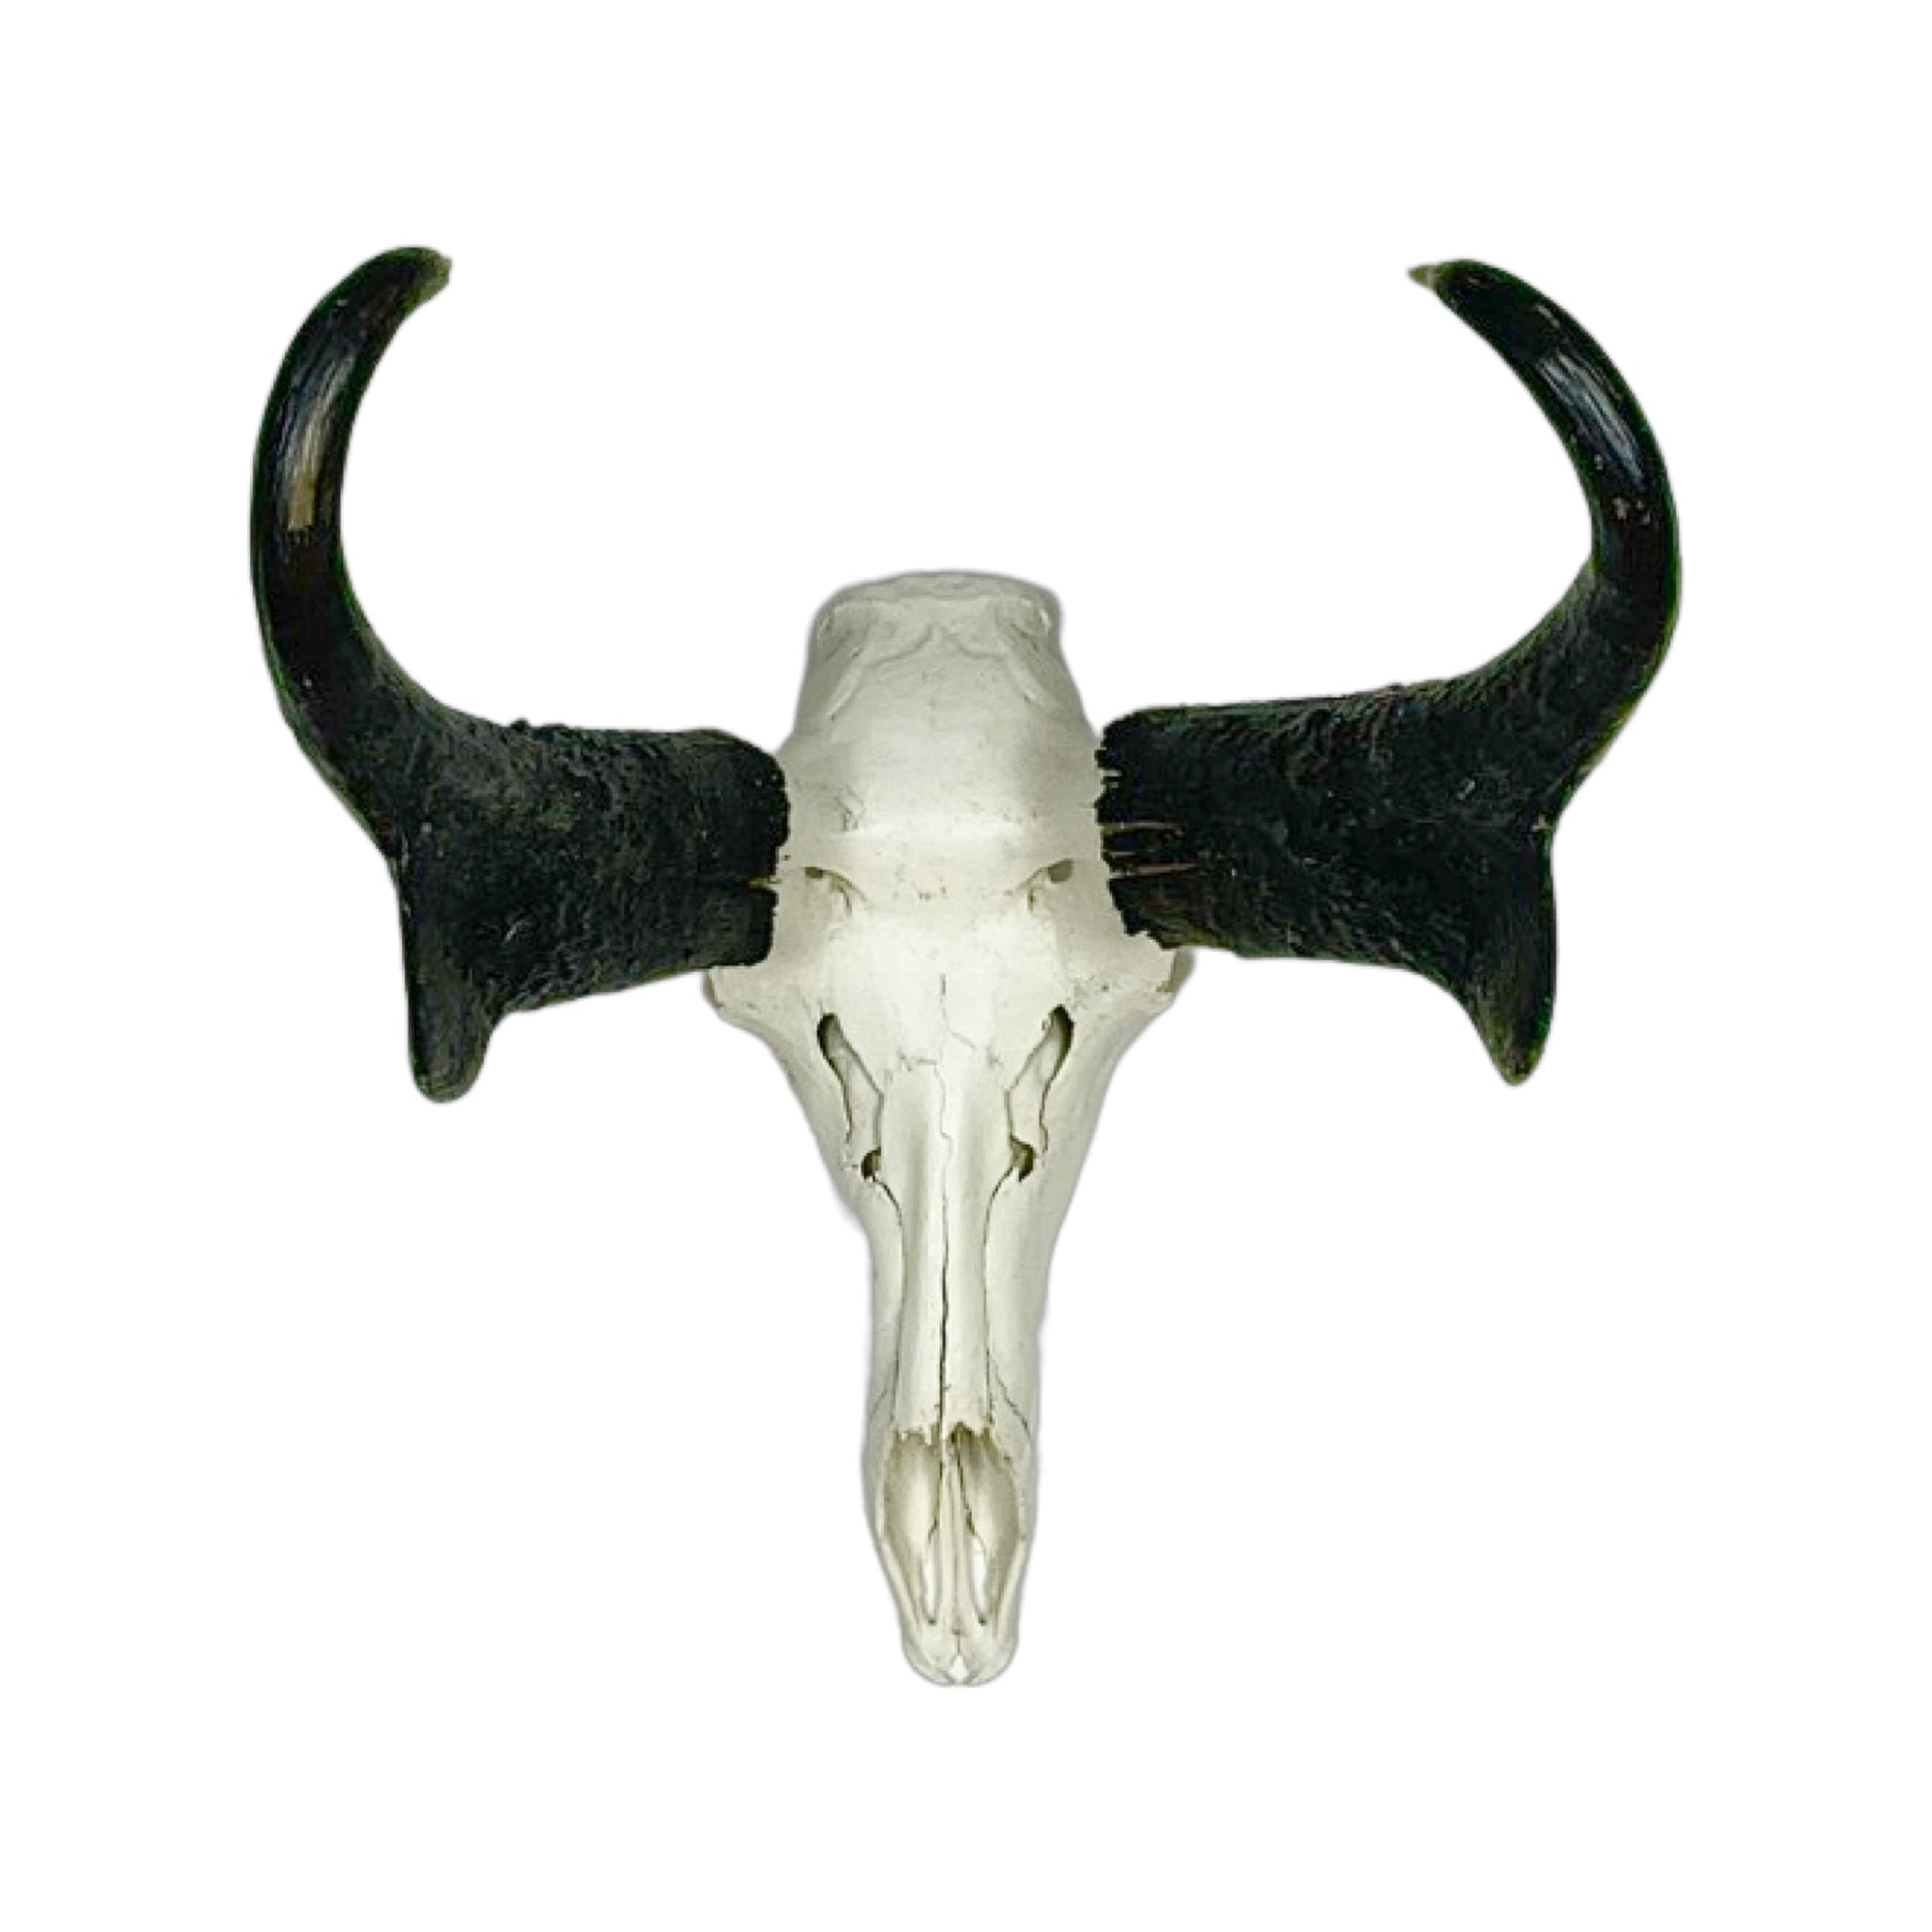 A Home Decor Taxidermy Pronghorn Skull of Grade Trophy